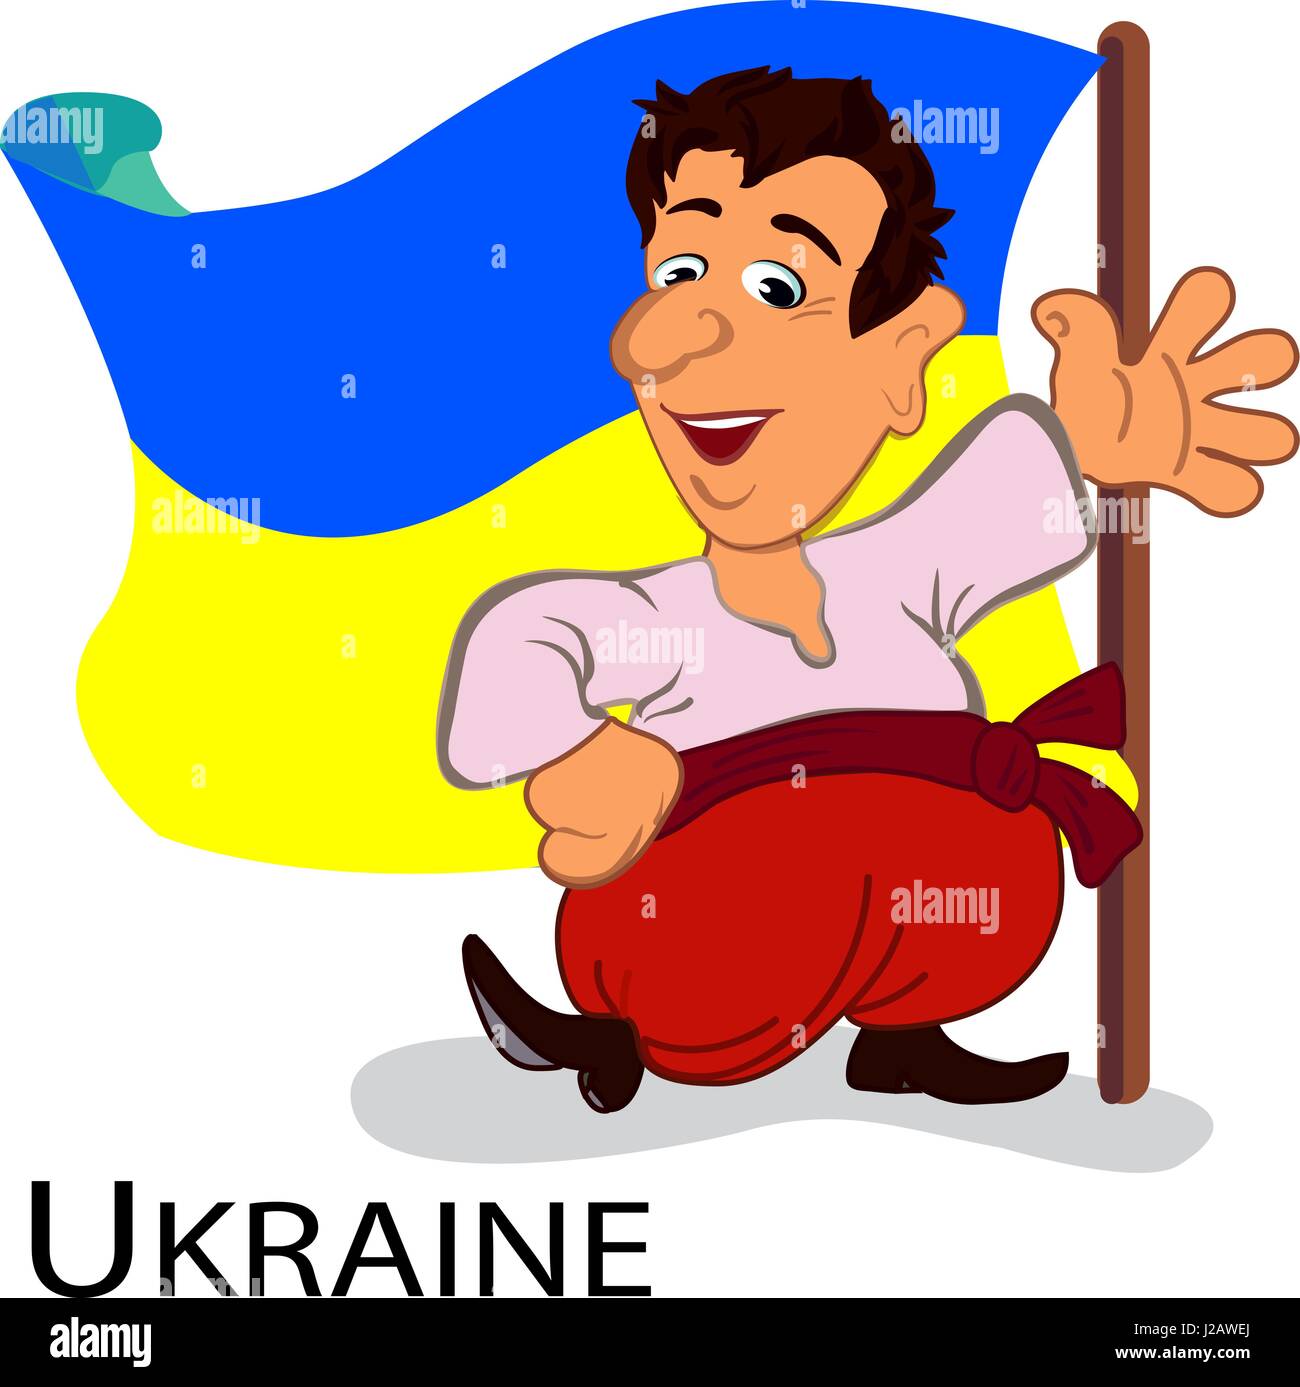 Ukrainian man in their national costume. A cheerful character. Black Text Ukraine. Stock Vector